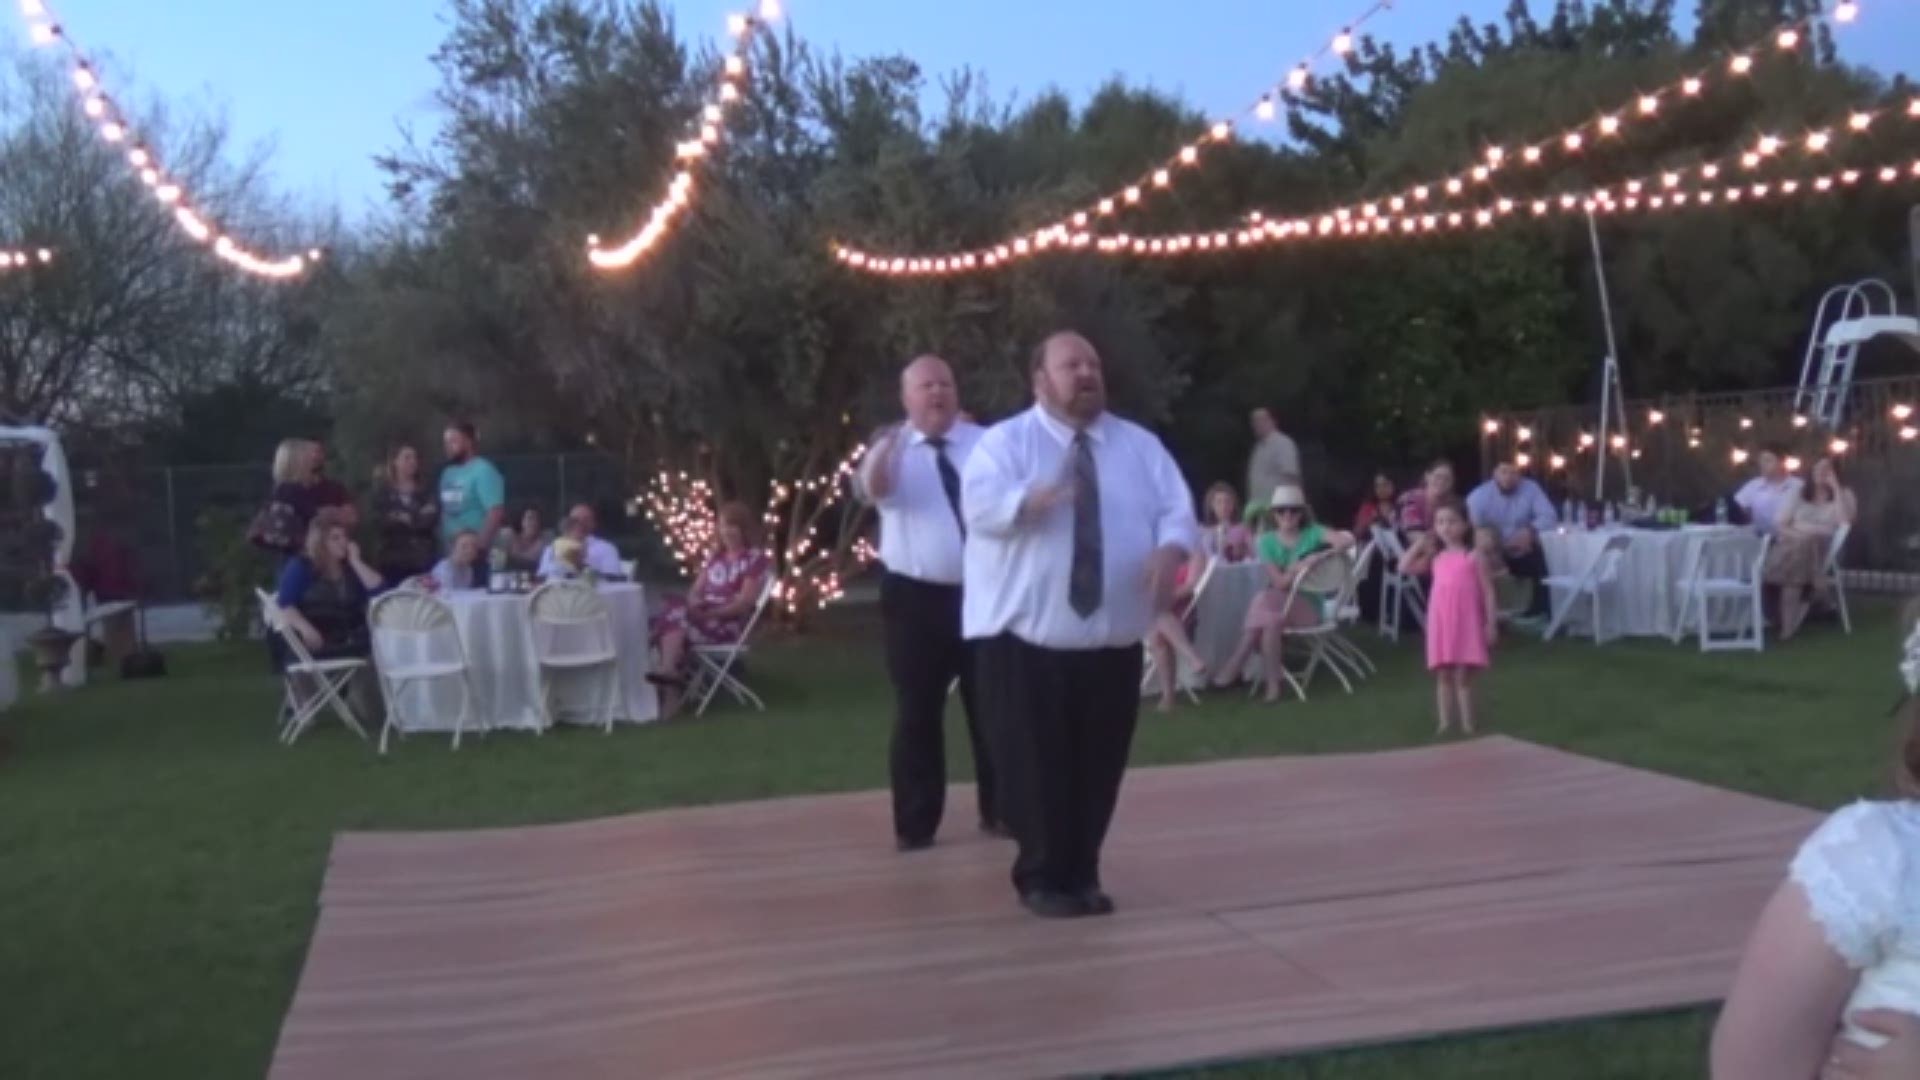 The groom's and bride's fathers at a recent wedding came out with an awesome dance.